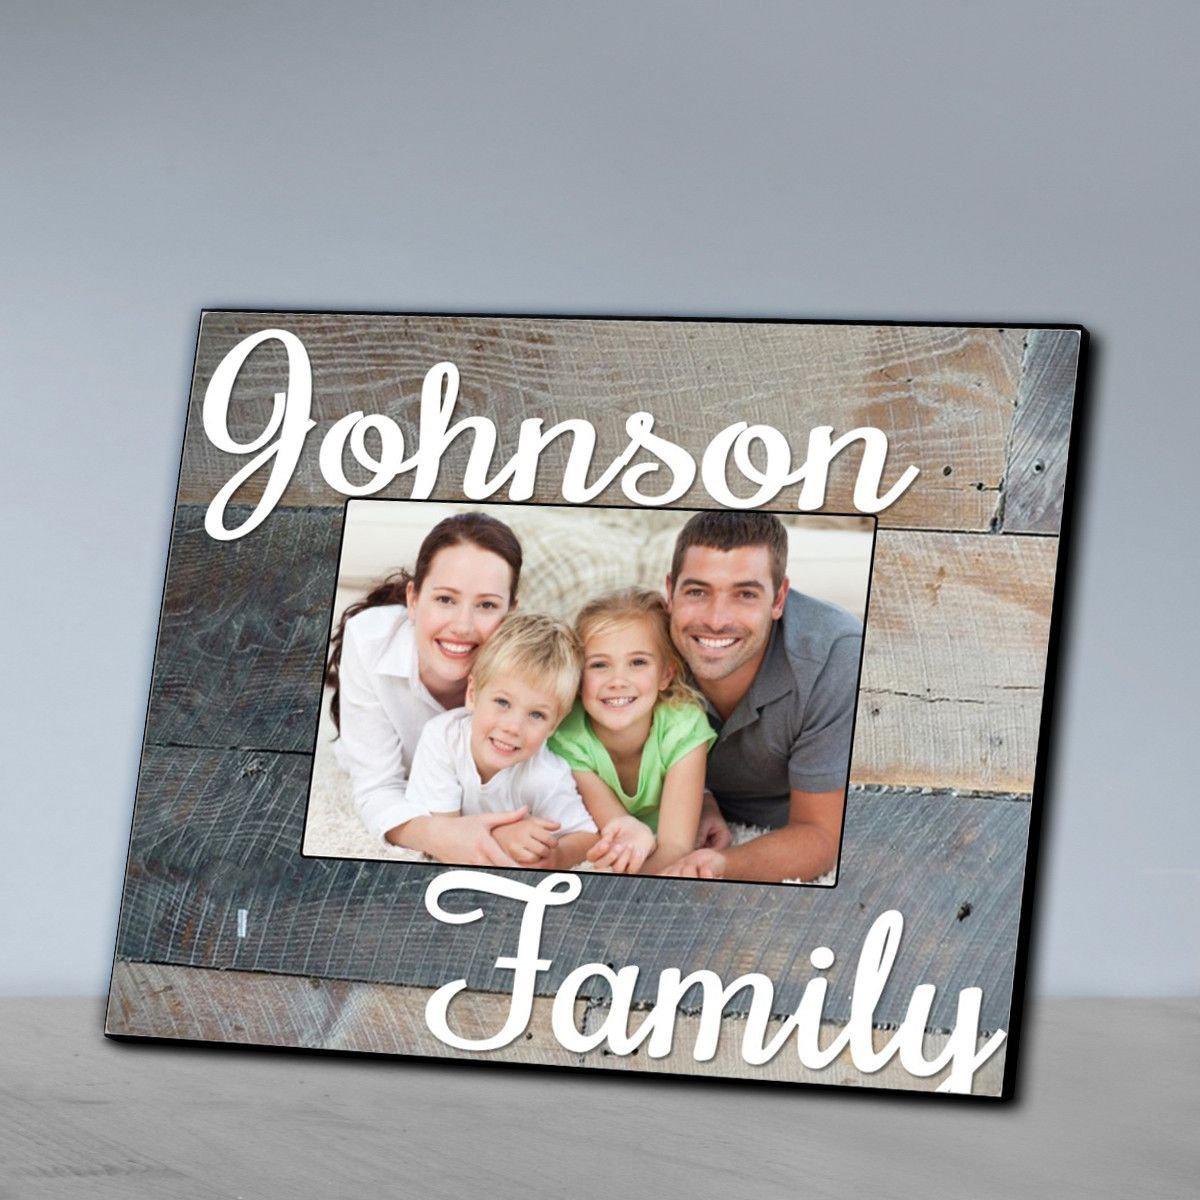 Personalized Family Wood Grain Picture Frame